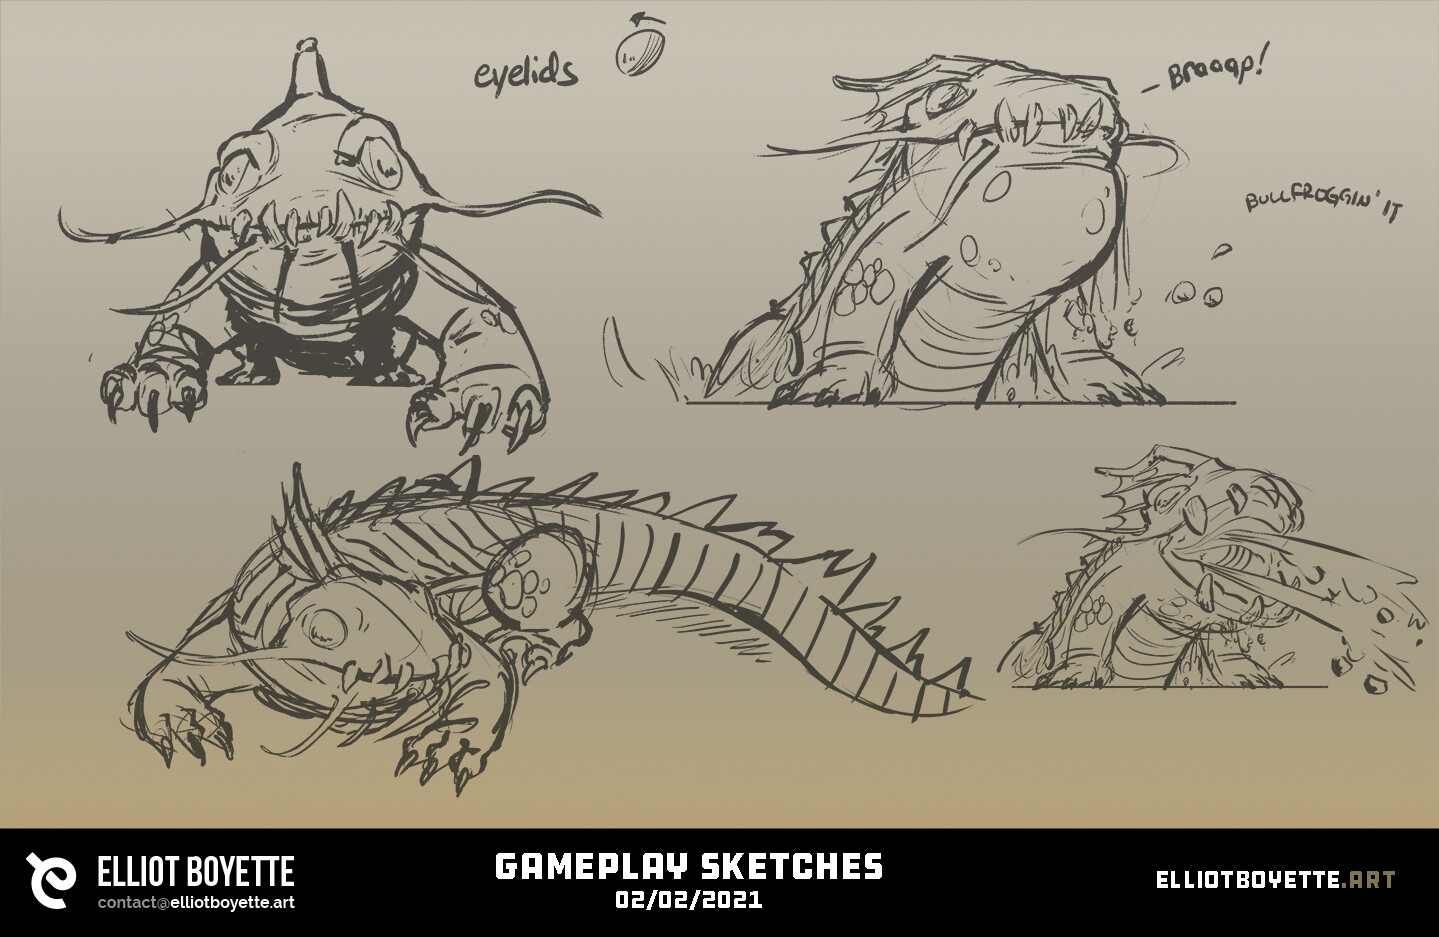 Some looser gameplay sketches of how the monster would move/act. 